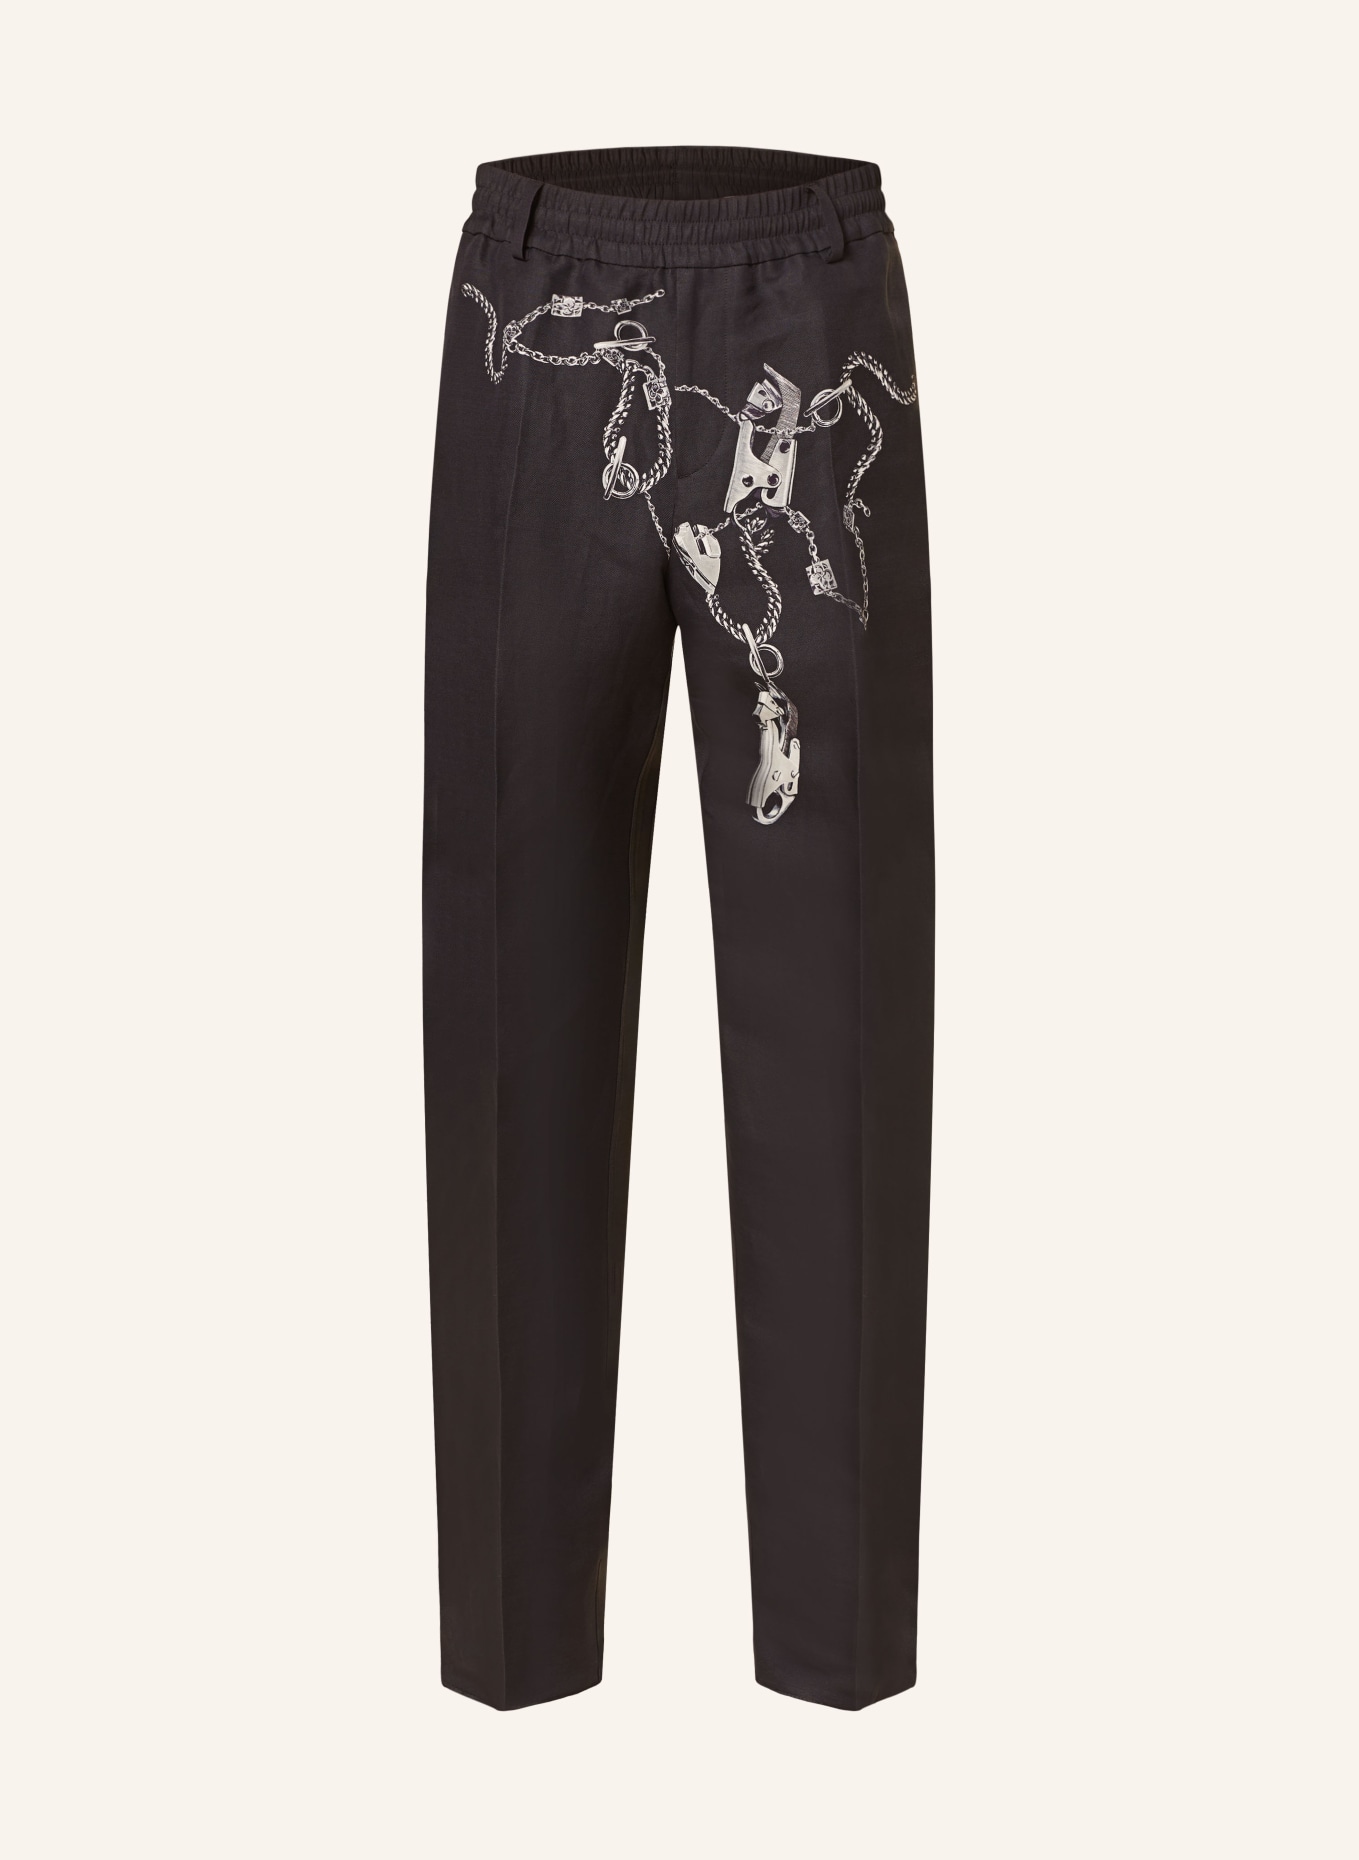 BURBERRY Hose Relaxed Fit, Farbe: SCHWARZ/ SILBER (Bild 1)